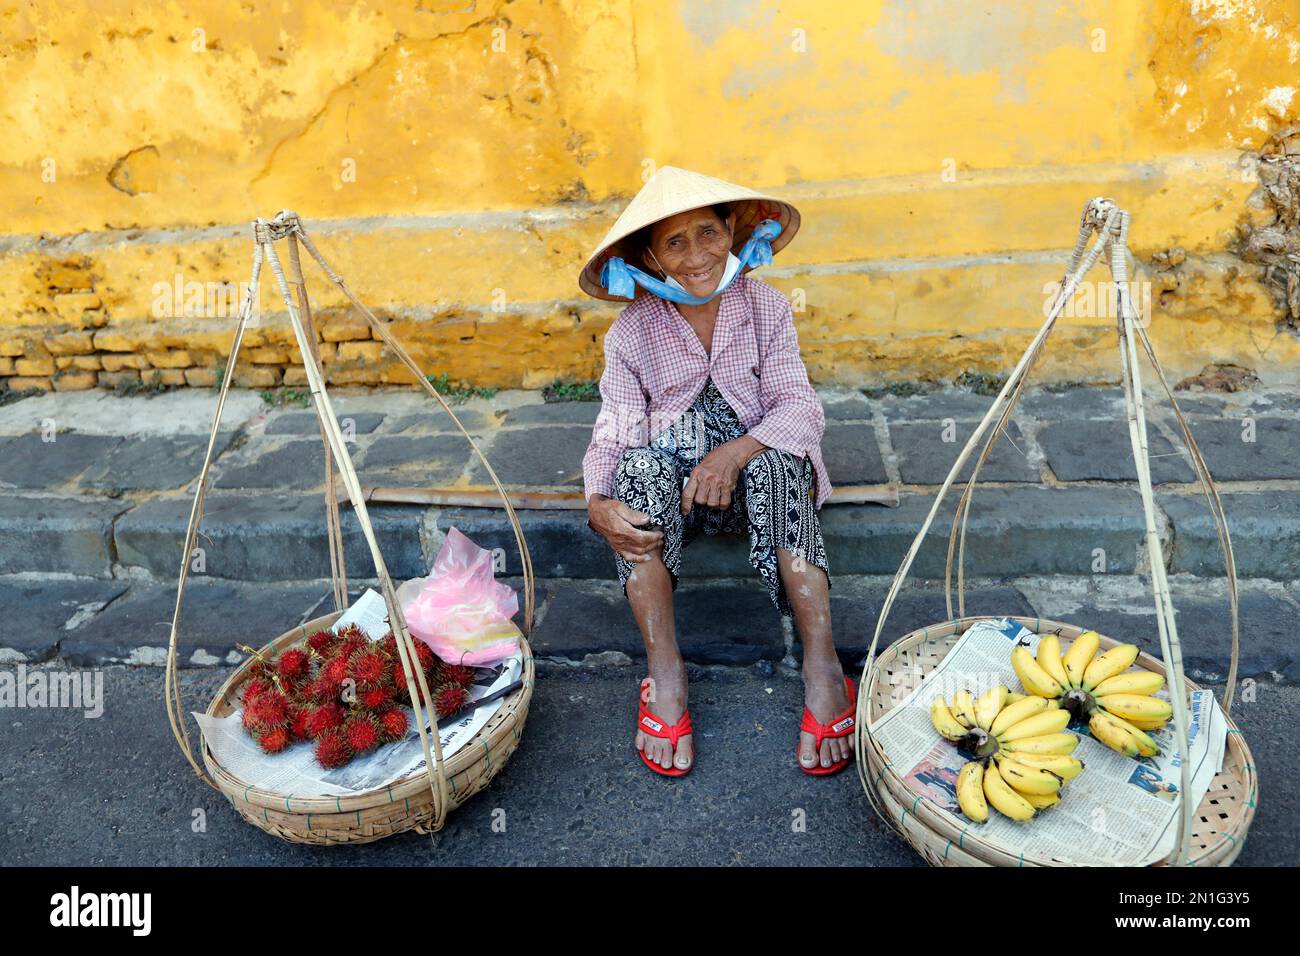 Typical street vendor with Vietnamese hat sitting down selling food, fresh fruit, Hoi An, Vietnam, Indochina, Southeast Asia, Asia Stock Photo